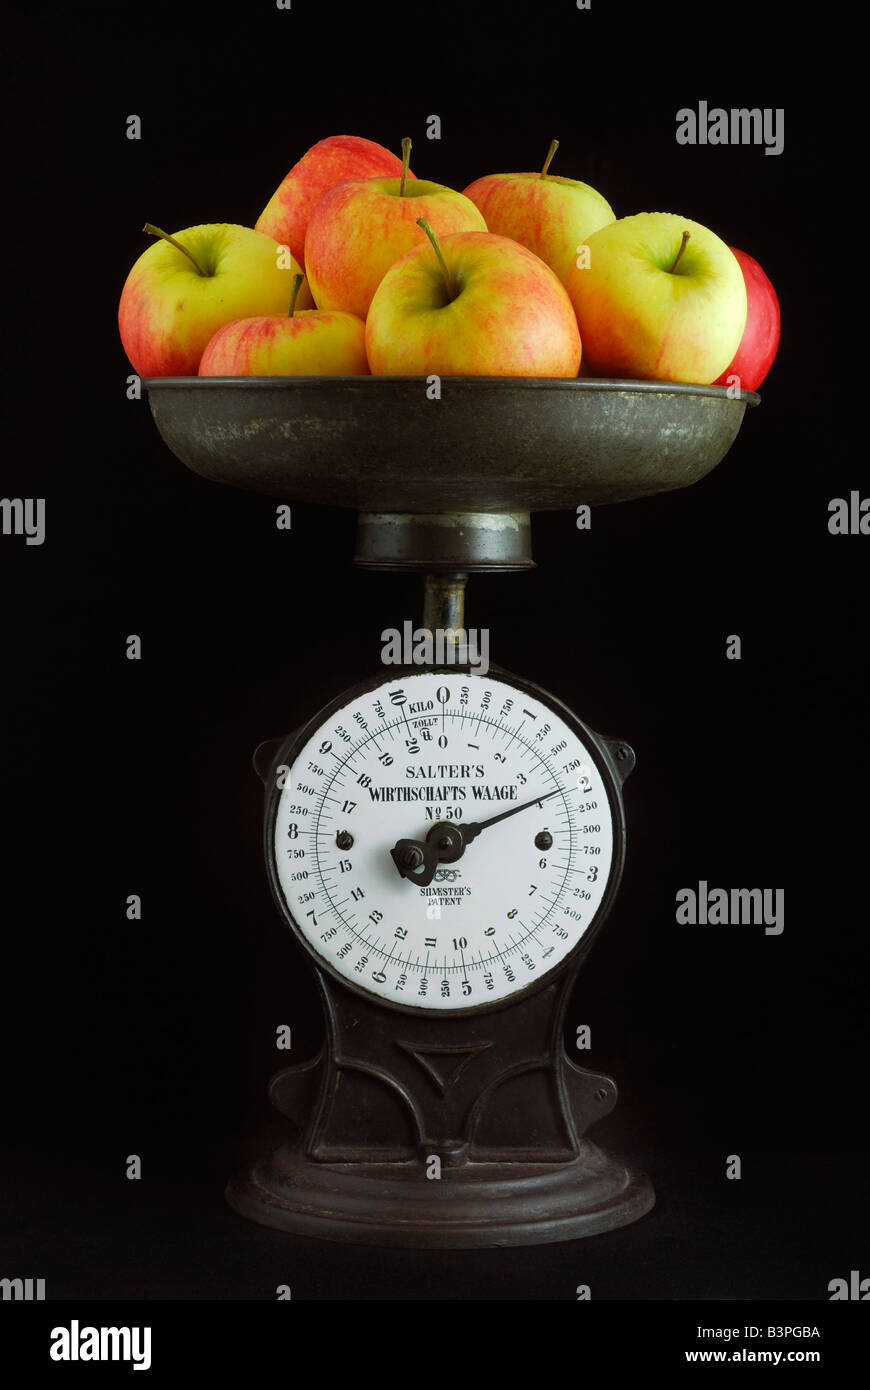 https://c8.alamy.com/comp/B3PGBA/old-black-household-scales-with-yellow-and-red-apples-almost-2-kilos-B3PGBA.jpg